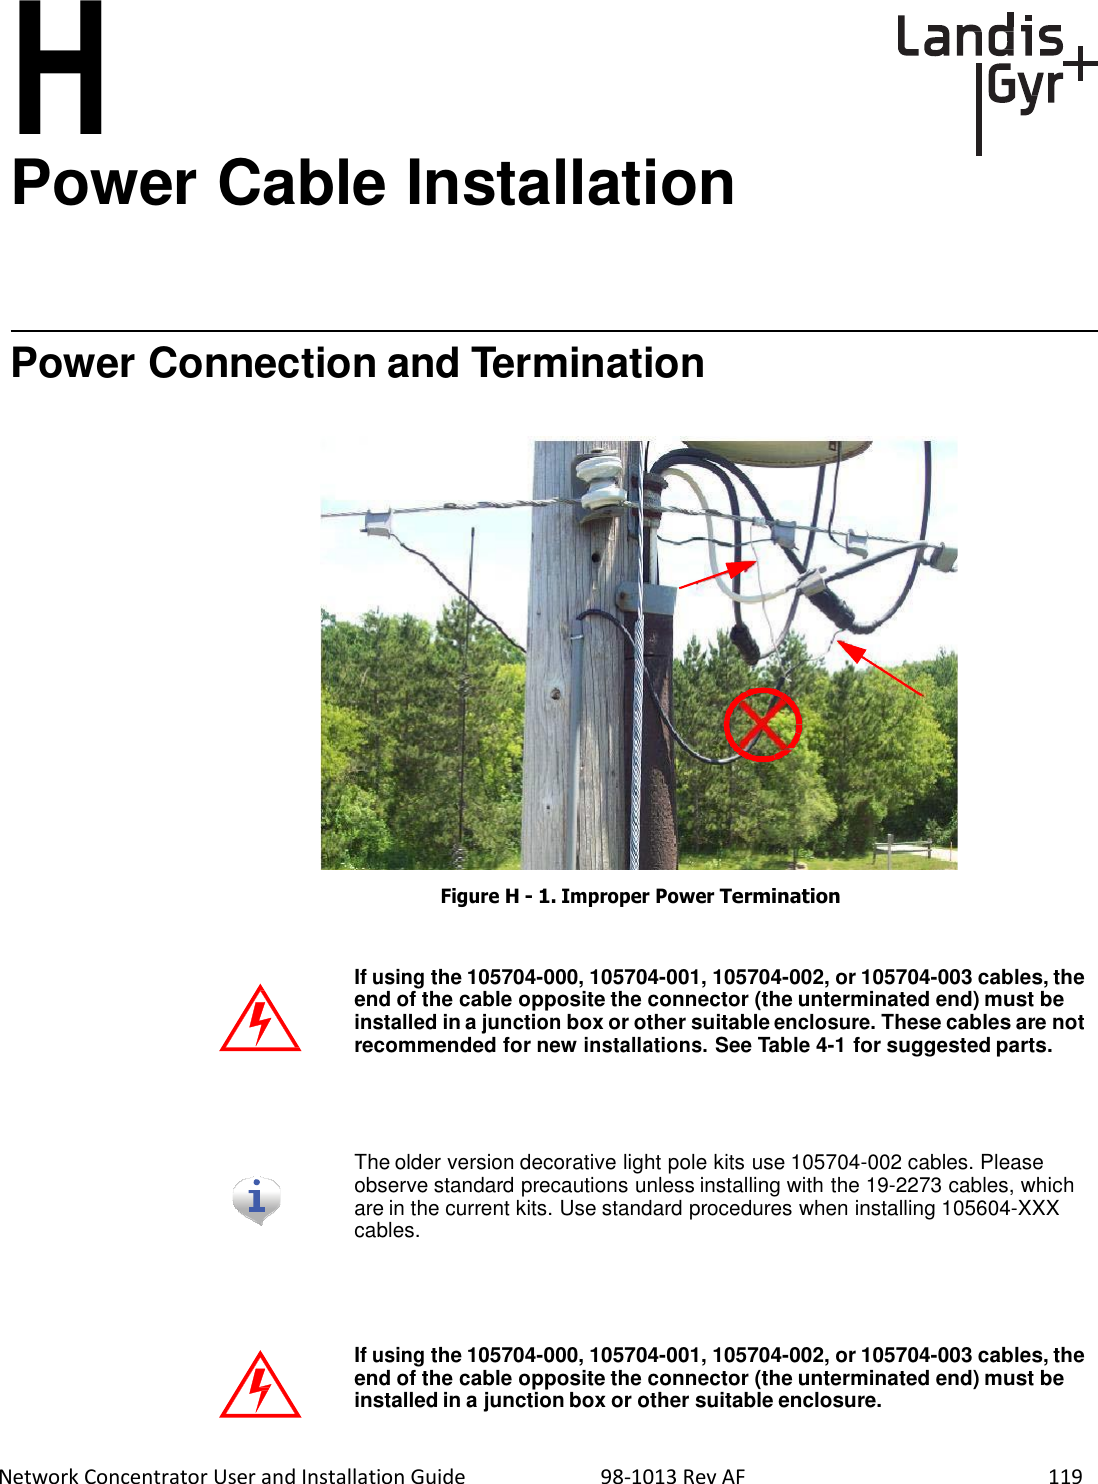  Network Concentrator User and Installation Guide                          98-1013 Rev AF    119        H Power Cable Installation       Power Connection and Termination                         Figure H - 1. Improper Power Termination    If using the 105704-000, 105704-001, 105704-002, or 105704-003 cables, the end of the cable opposite the connector (the unterminated end) must be installed in a junction box or other suitable enclosure. These cables are not recommended for new installations. See Table 4-1 for suggested parts.     The older version decorative light pole kits use 105704-002 cables. Please observe standard precautions unless installing with the 19-2273 cables, which are in the current kits. Use standard procedures when installing 105604-XXX cables.      If using the 105704-000, 105704-001, 105704-002, or 105704-003 cables, the end of the cable opposite the connector (the unterminated end) must be installed in a junction box or other suitable enclosure. 